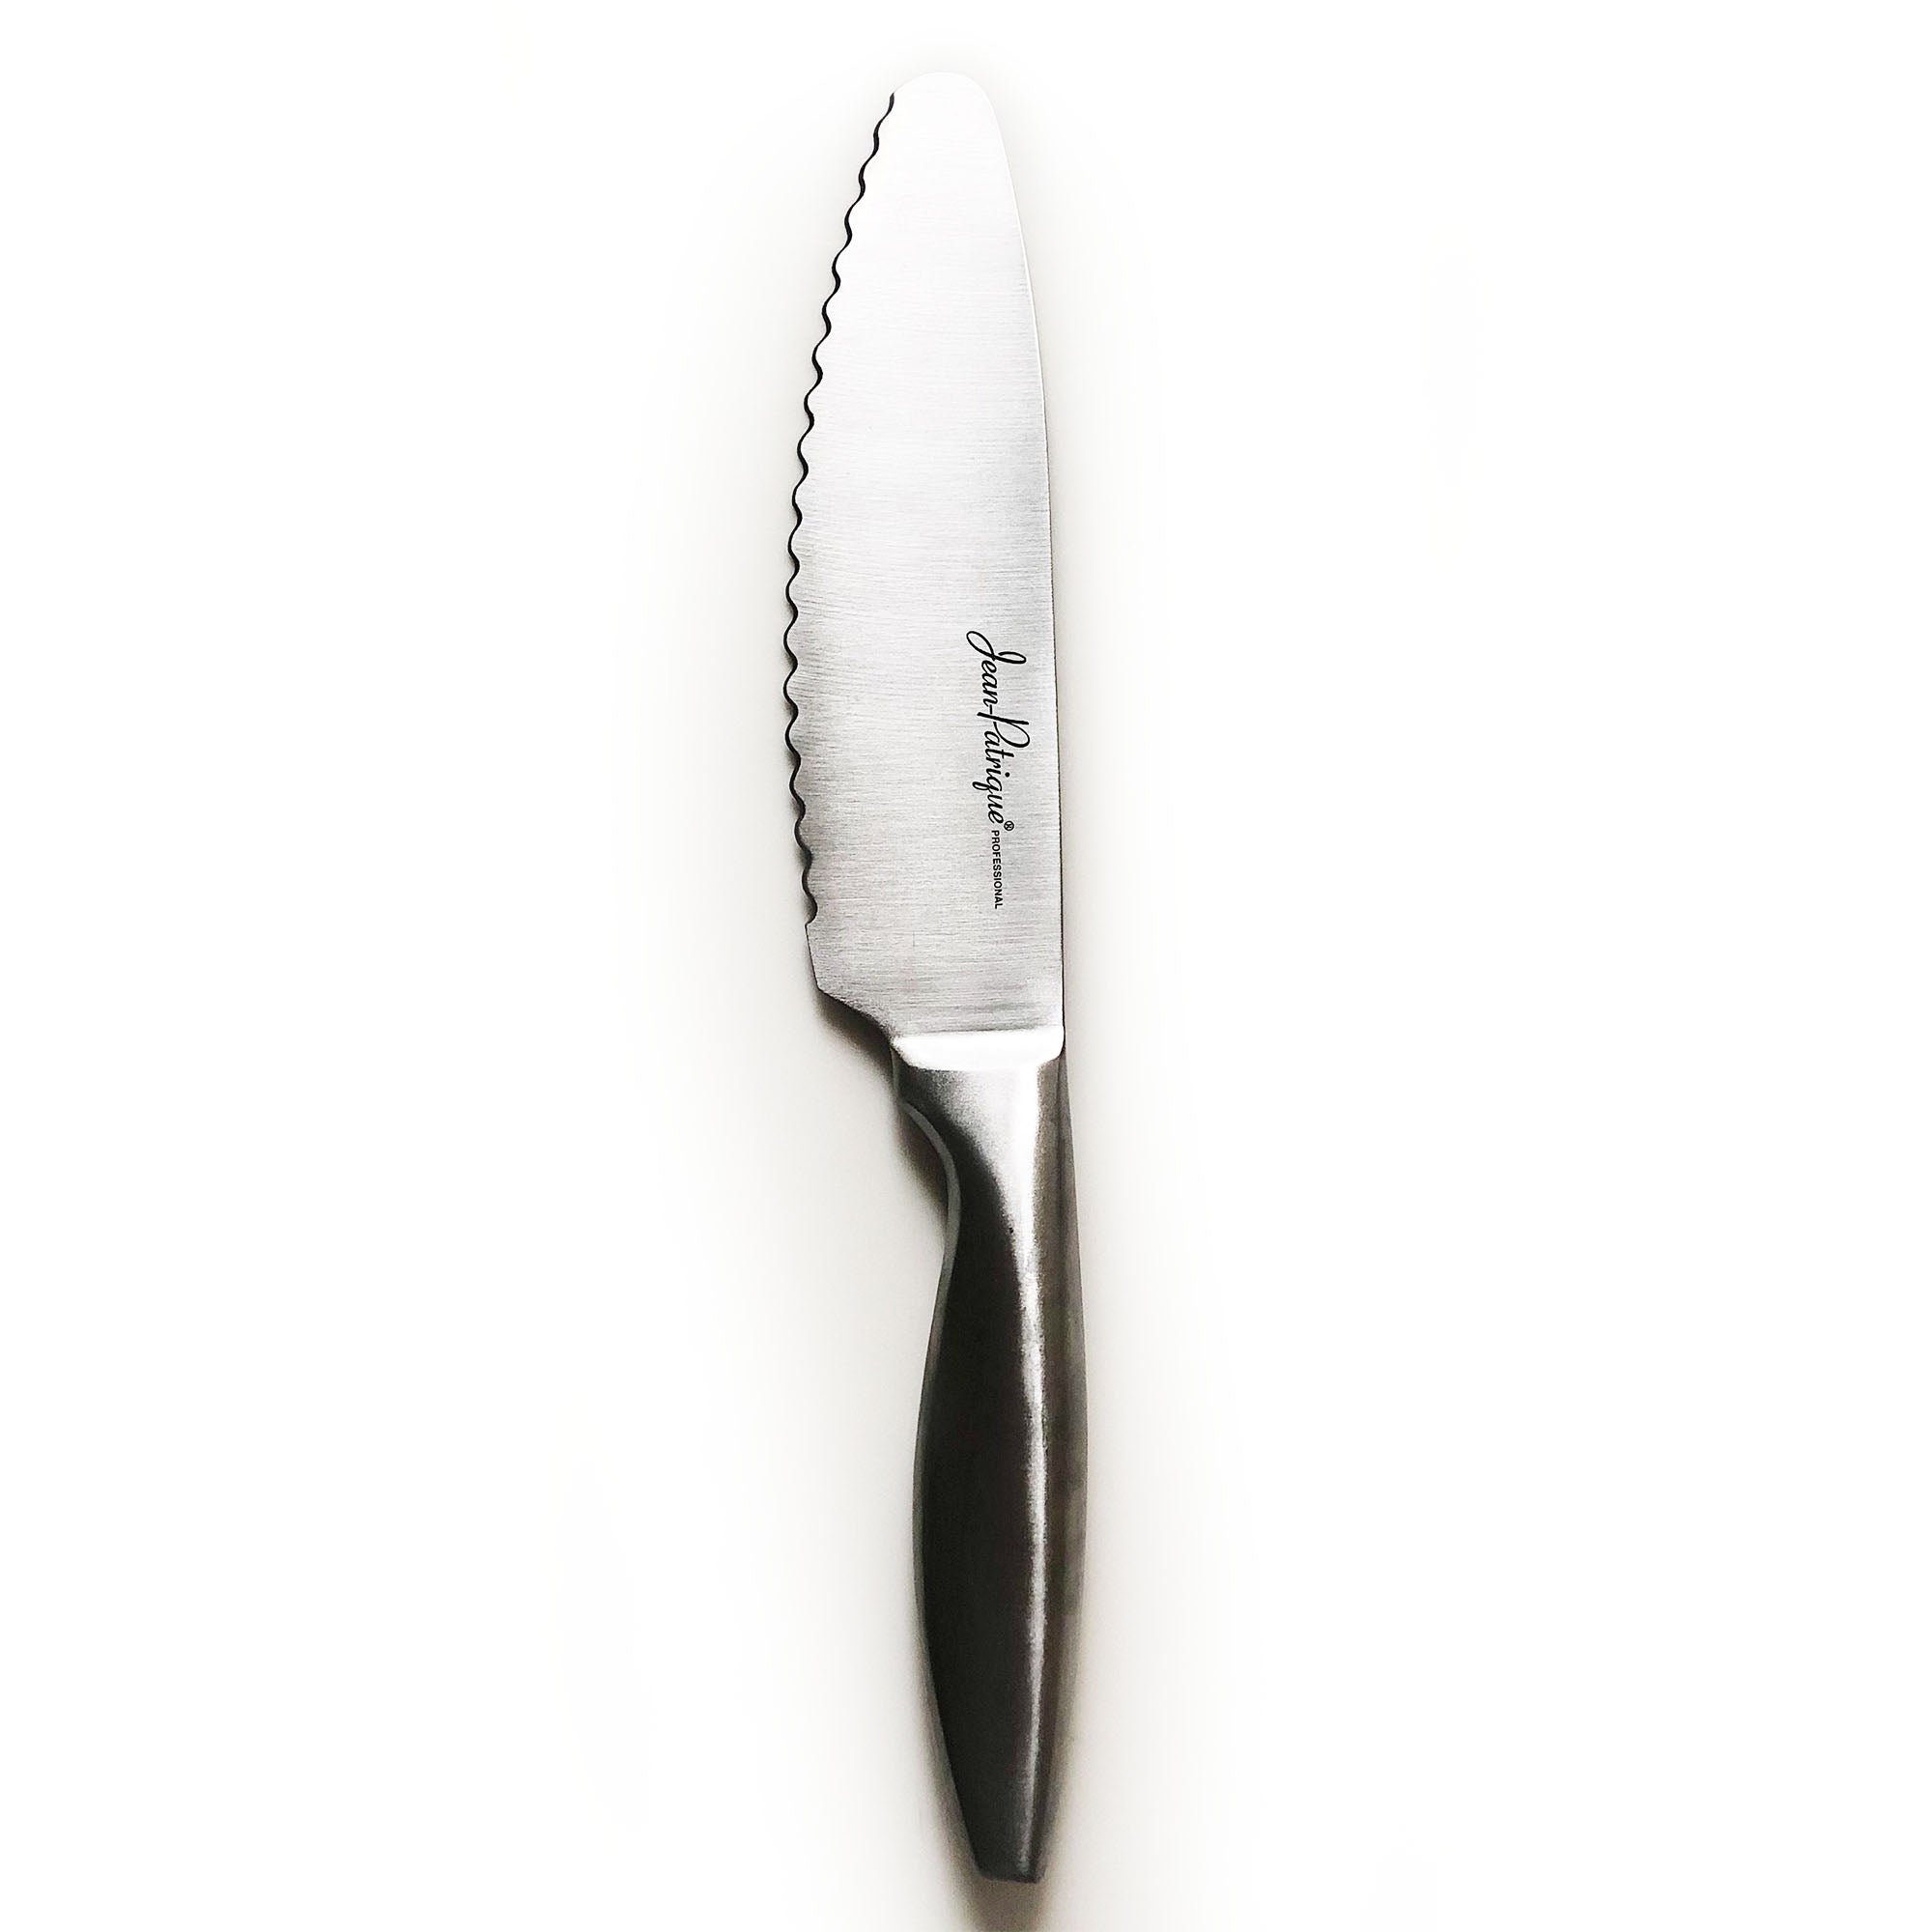 Professional Tuscan Cleaver Knife - 5 in